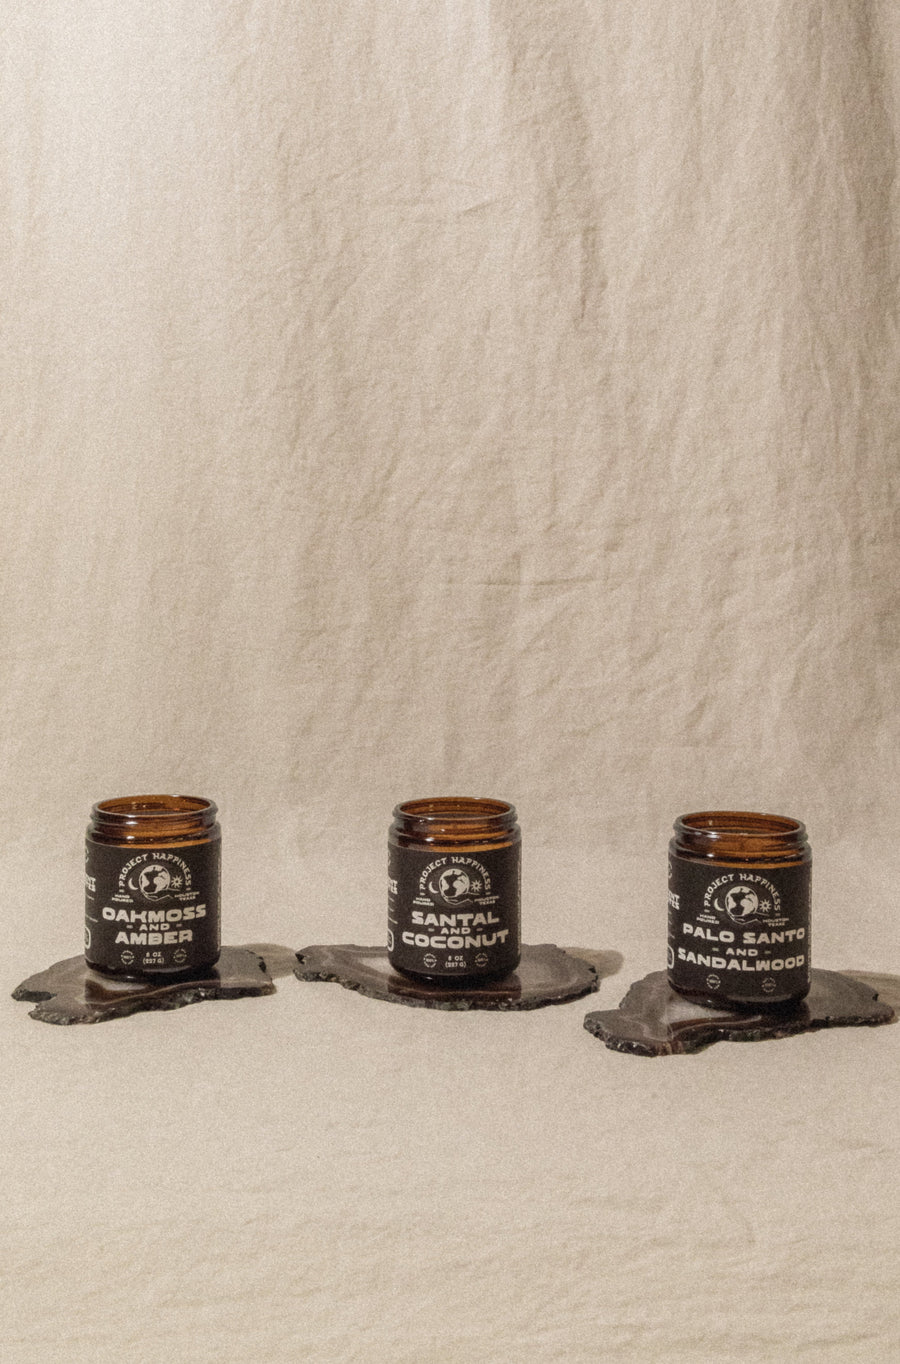 Project Happiness Candle Co. Objects Project Happiness Candle .:. Palo Santo & Sandalwood